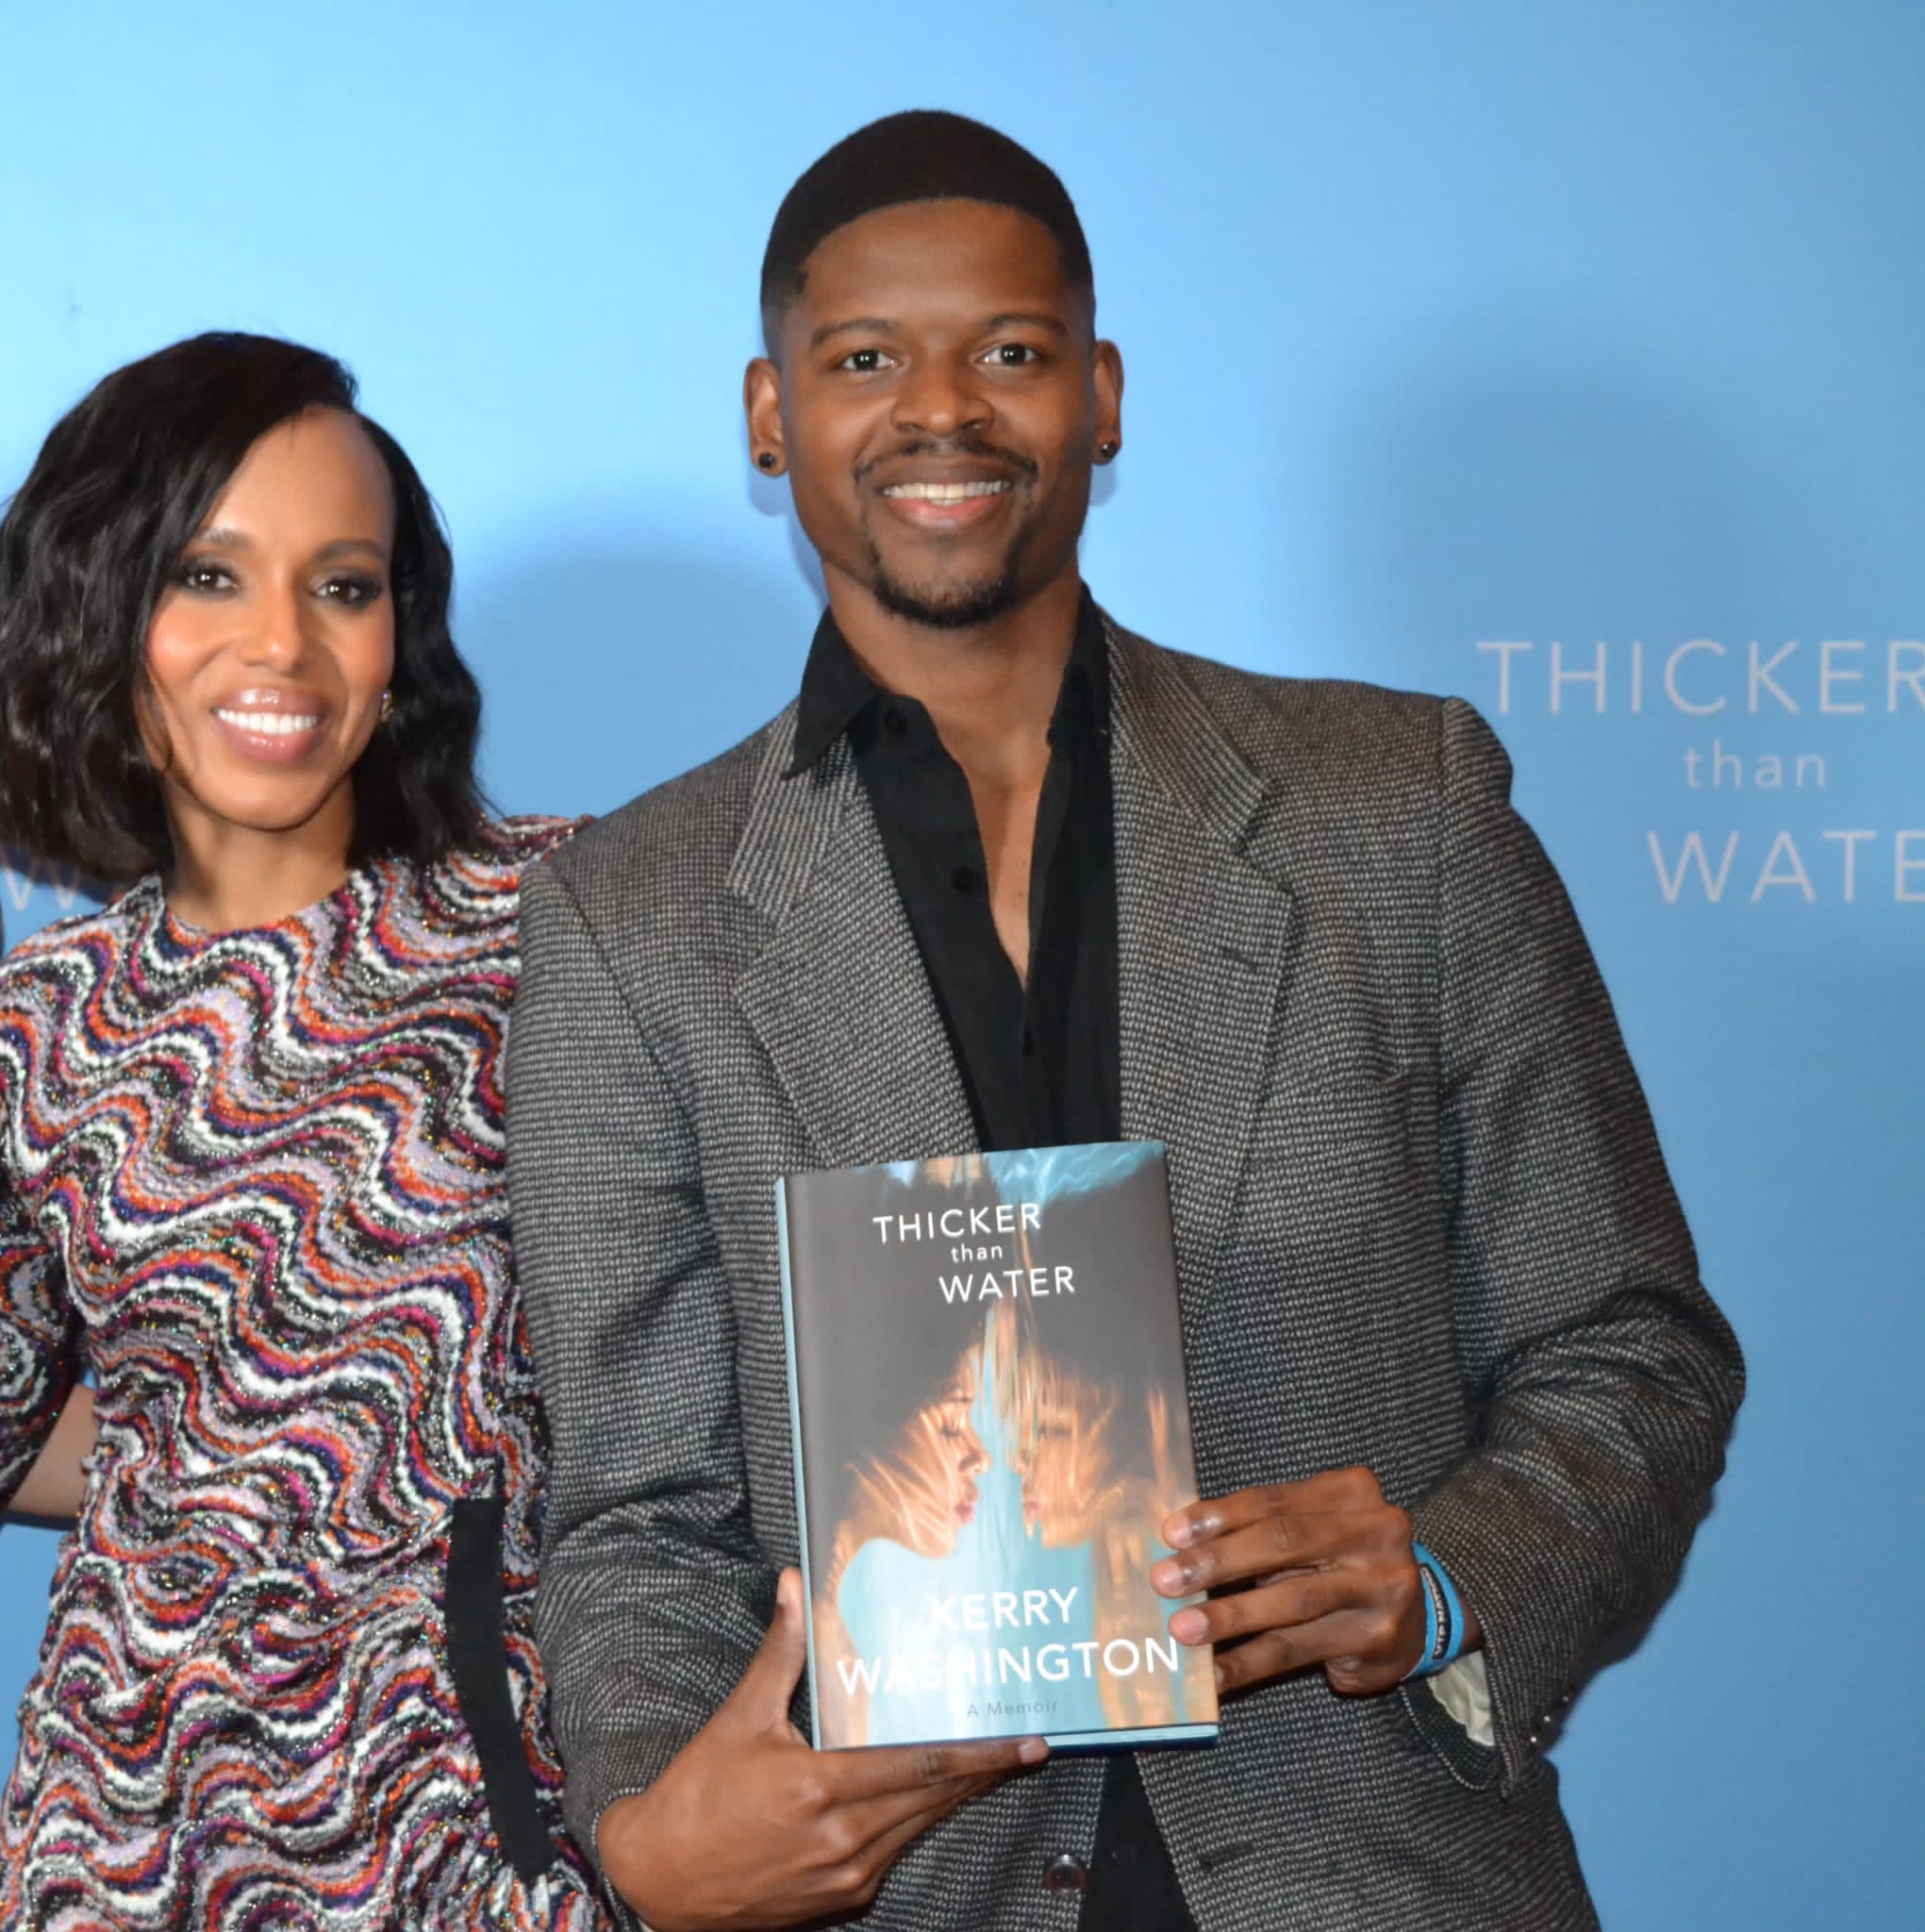 Corey Whipple supporting Hollywood superstar actress at her memoir release